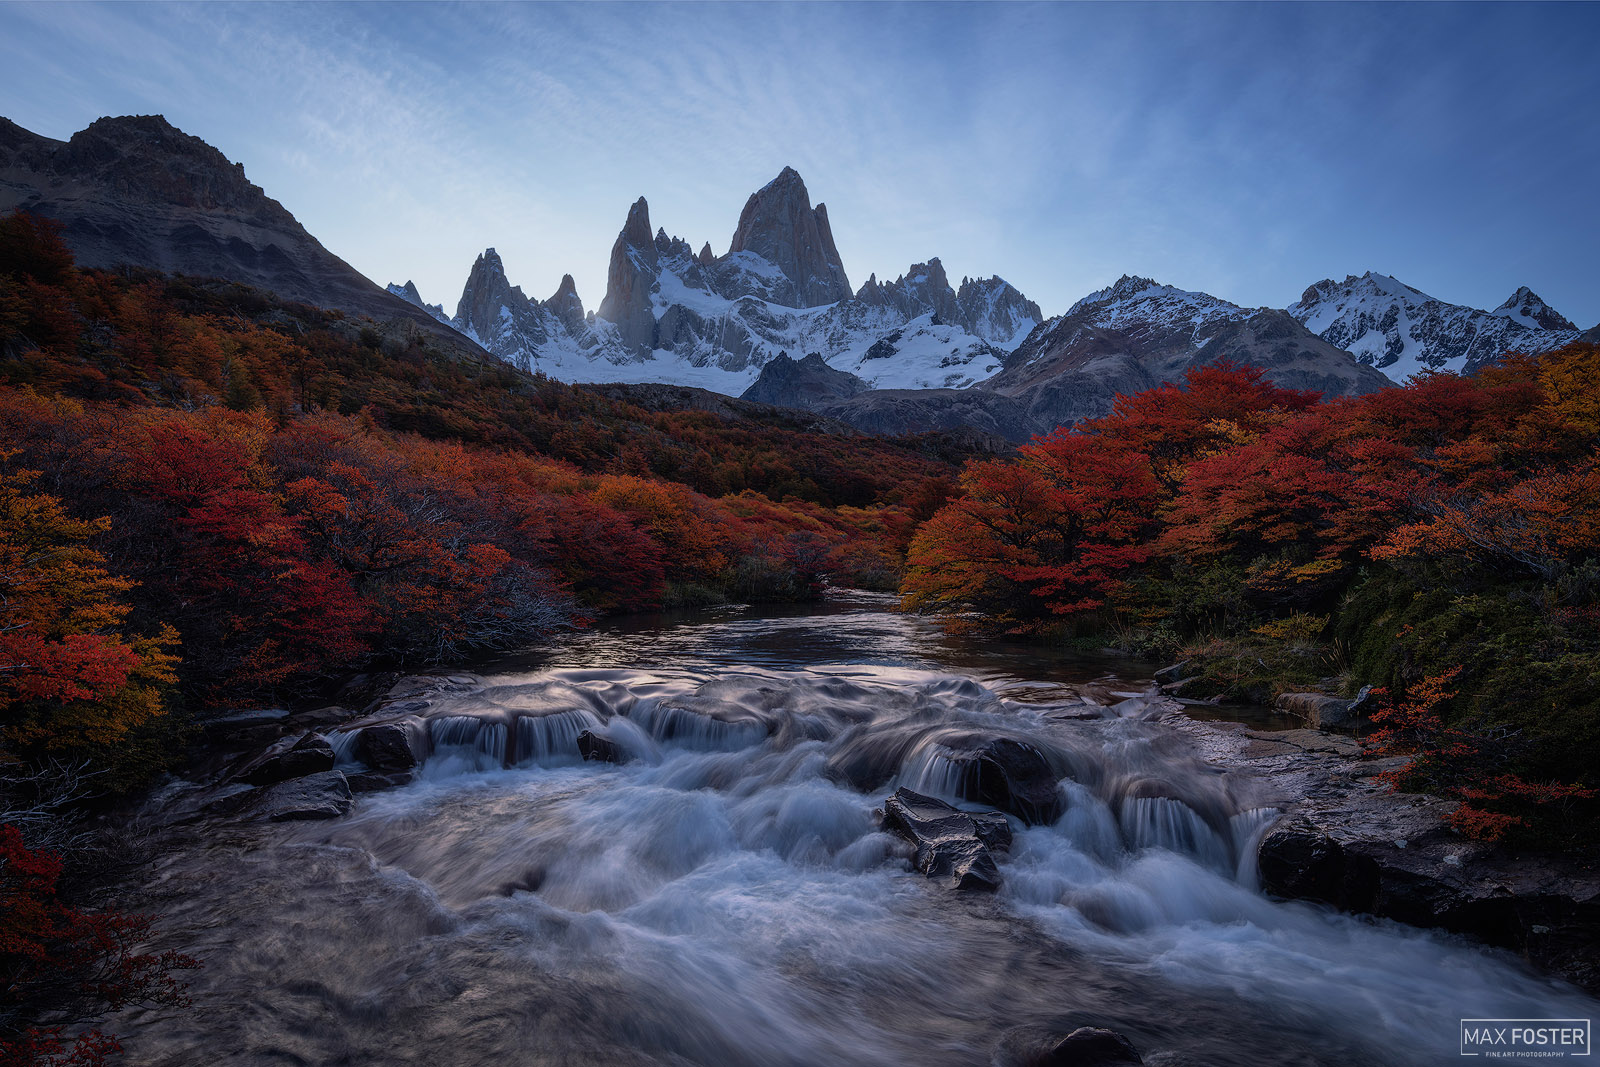 Enrich your living space with Dusky Dreams, Max Foster's limited edition photographic print of Mount Fitz Roy in Los Glaciares...